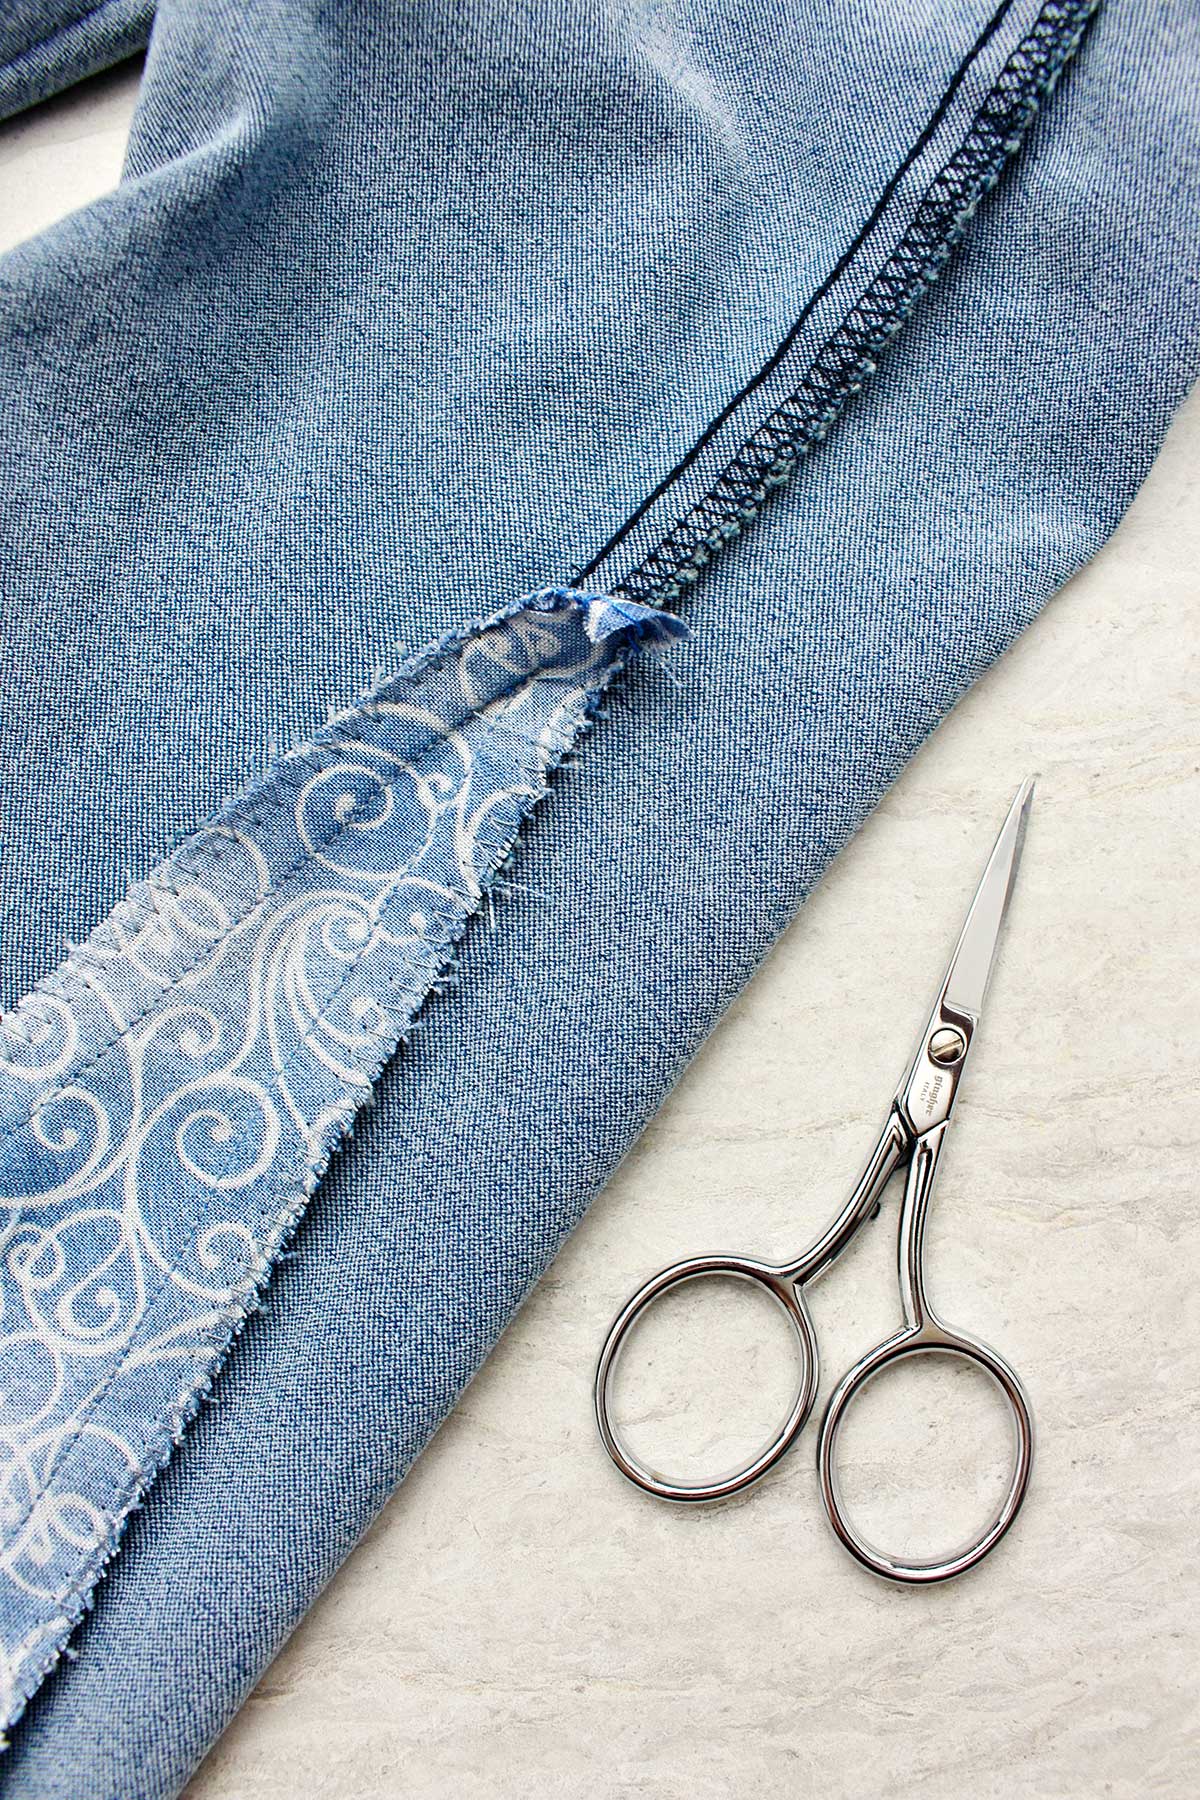 Close up view of inside out jeans with piece of fabric sewn in.